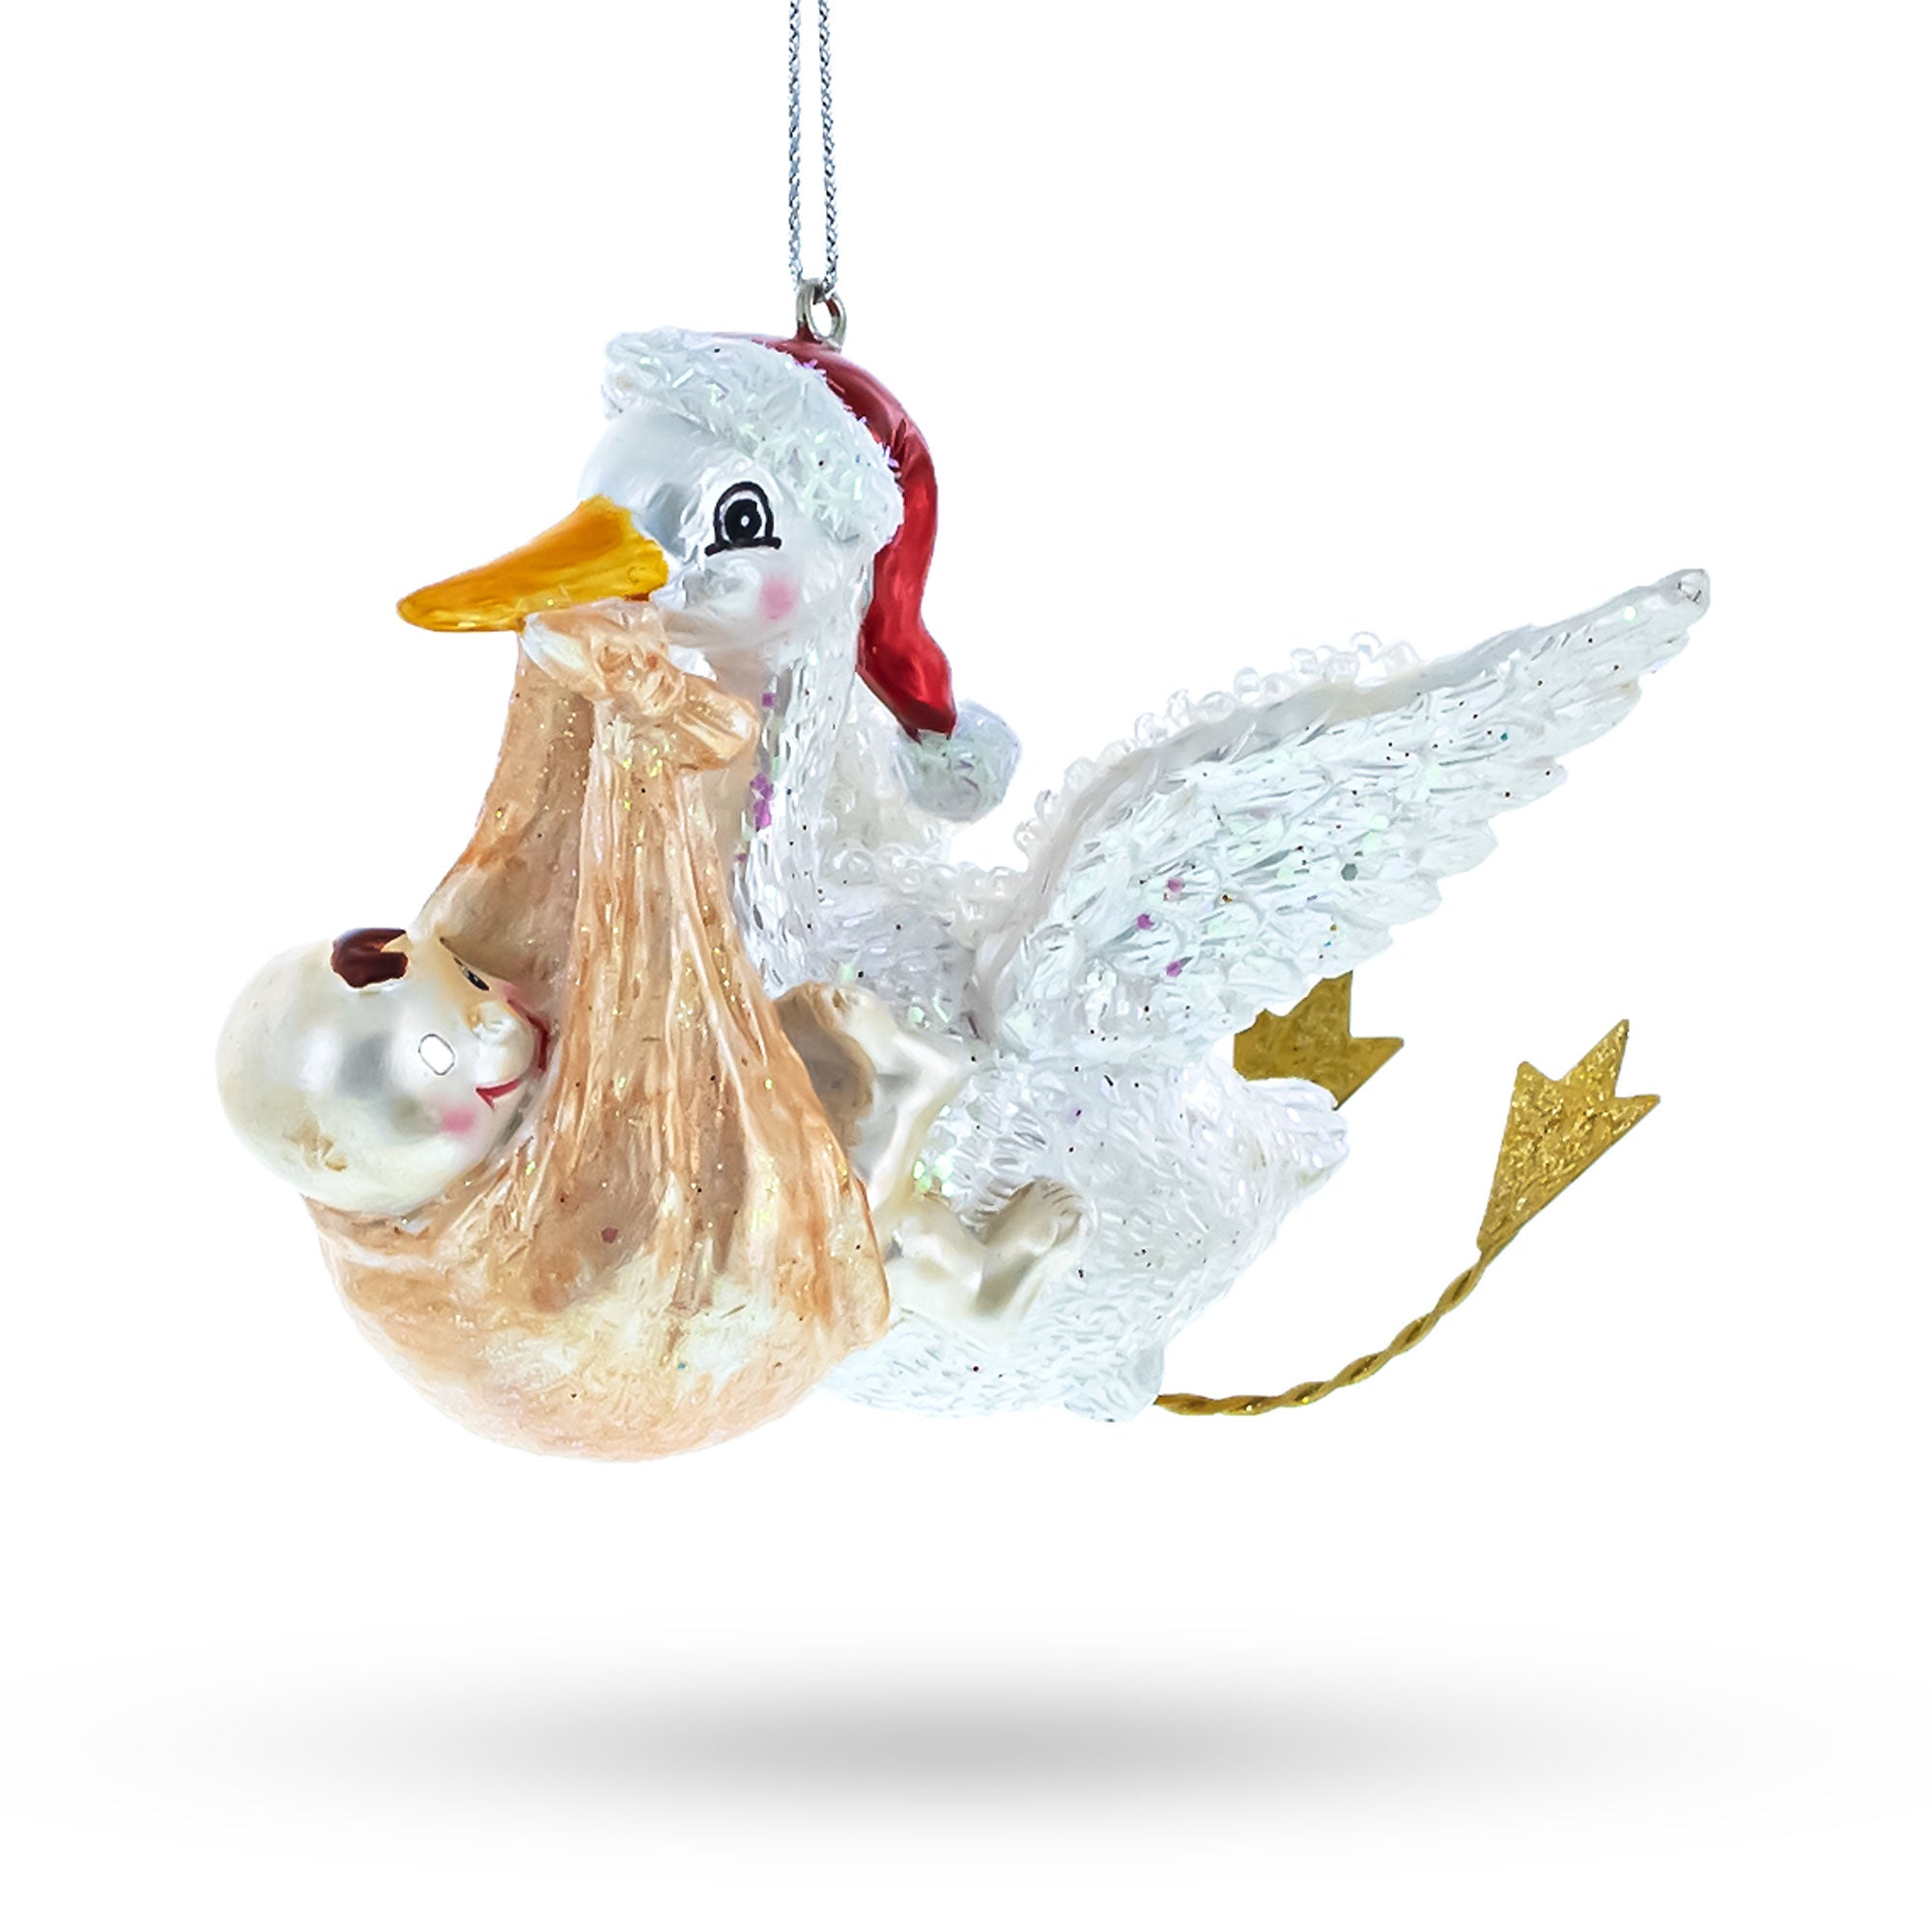 Charming Stork Carrying Baby - Blown Glass Christmas Ornament